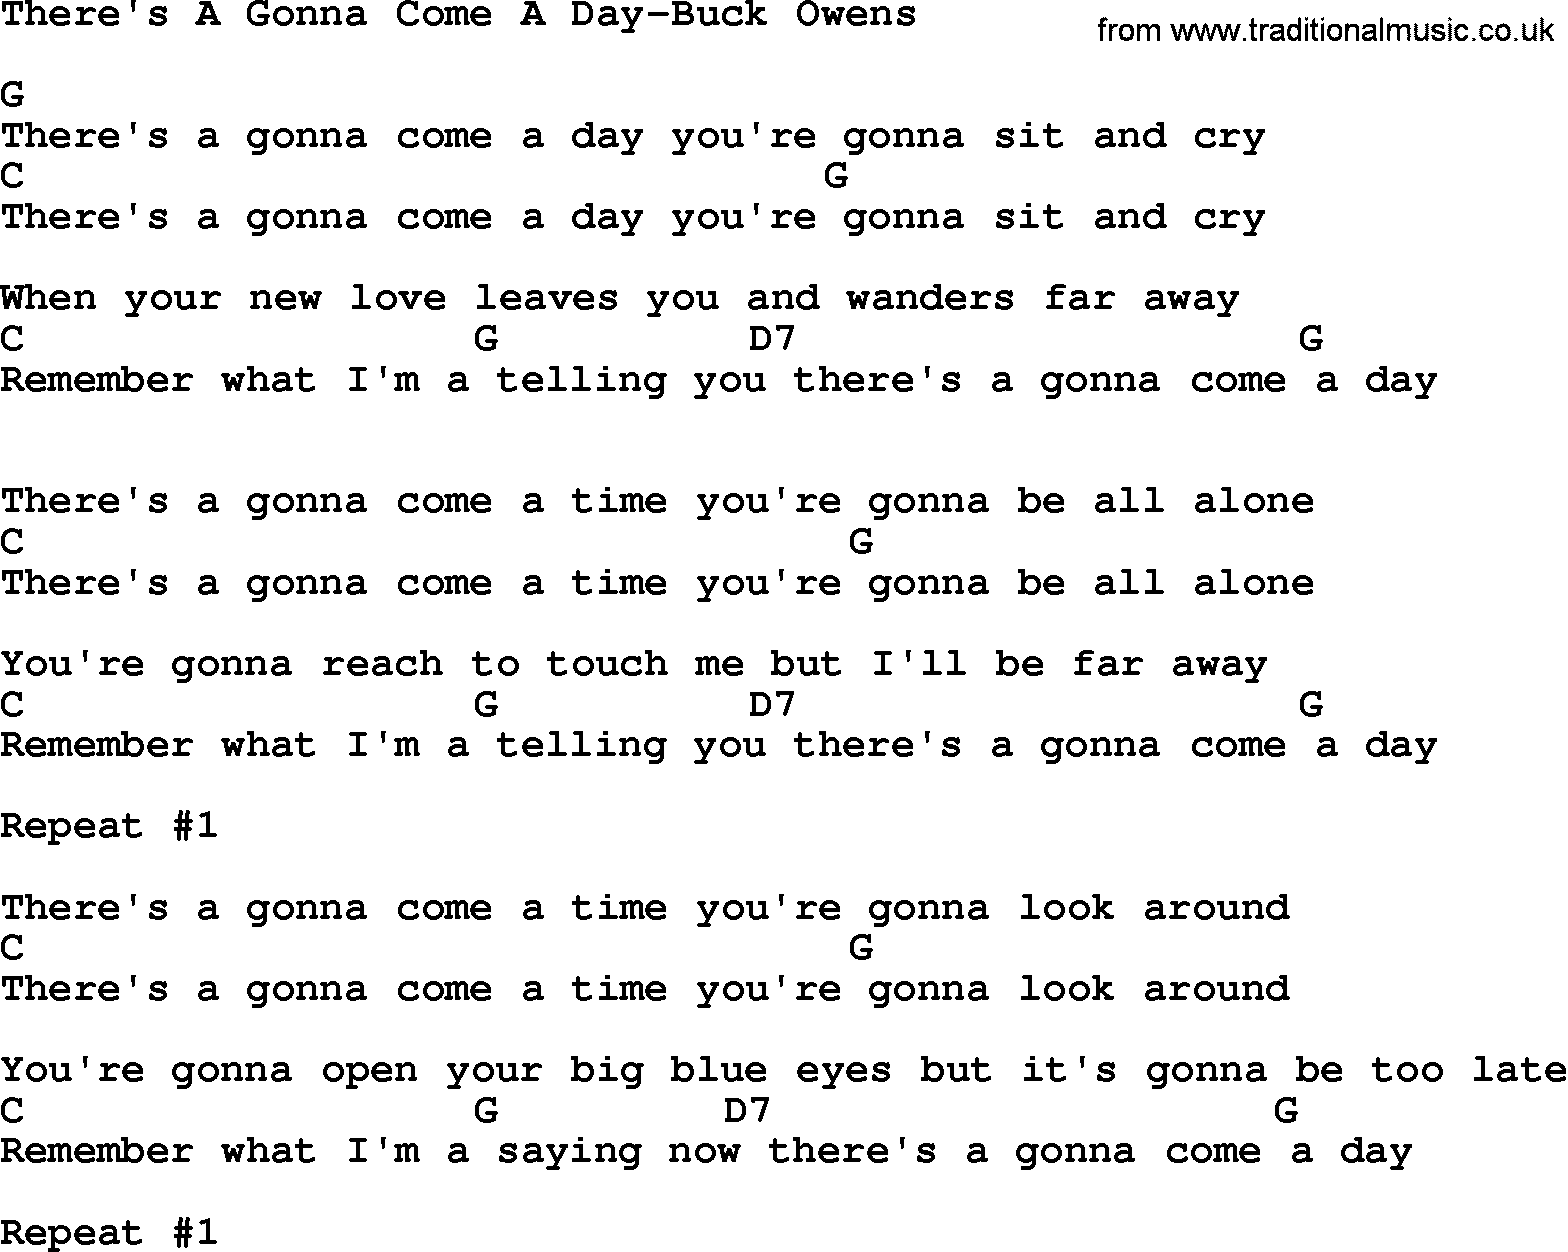 Country music song: There's A Gonna Come A Day-Buck Owens lyrics and chords